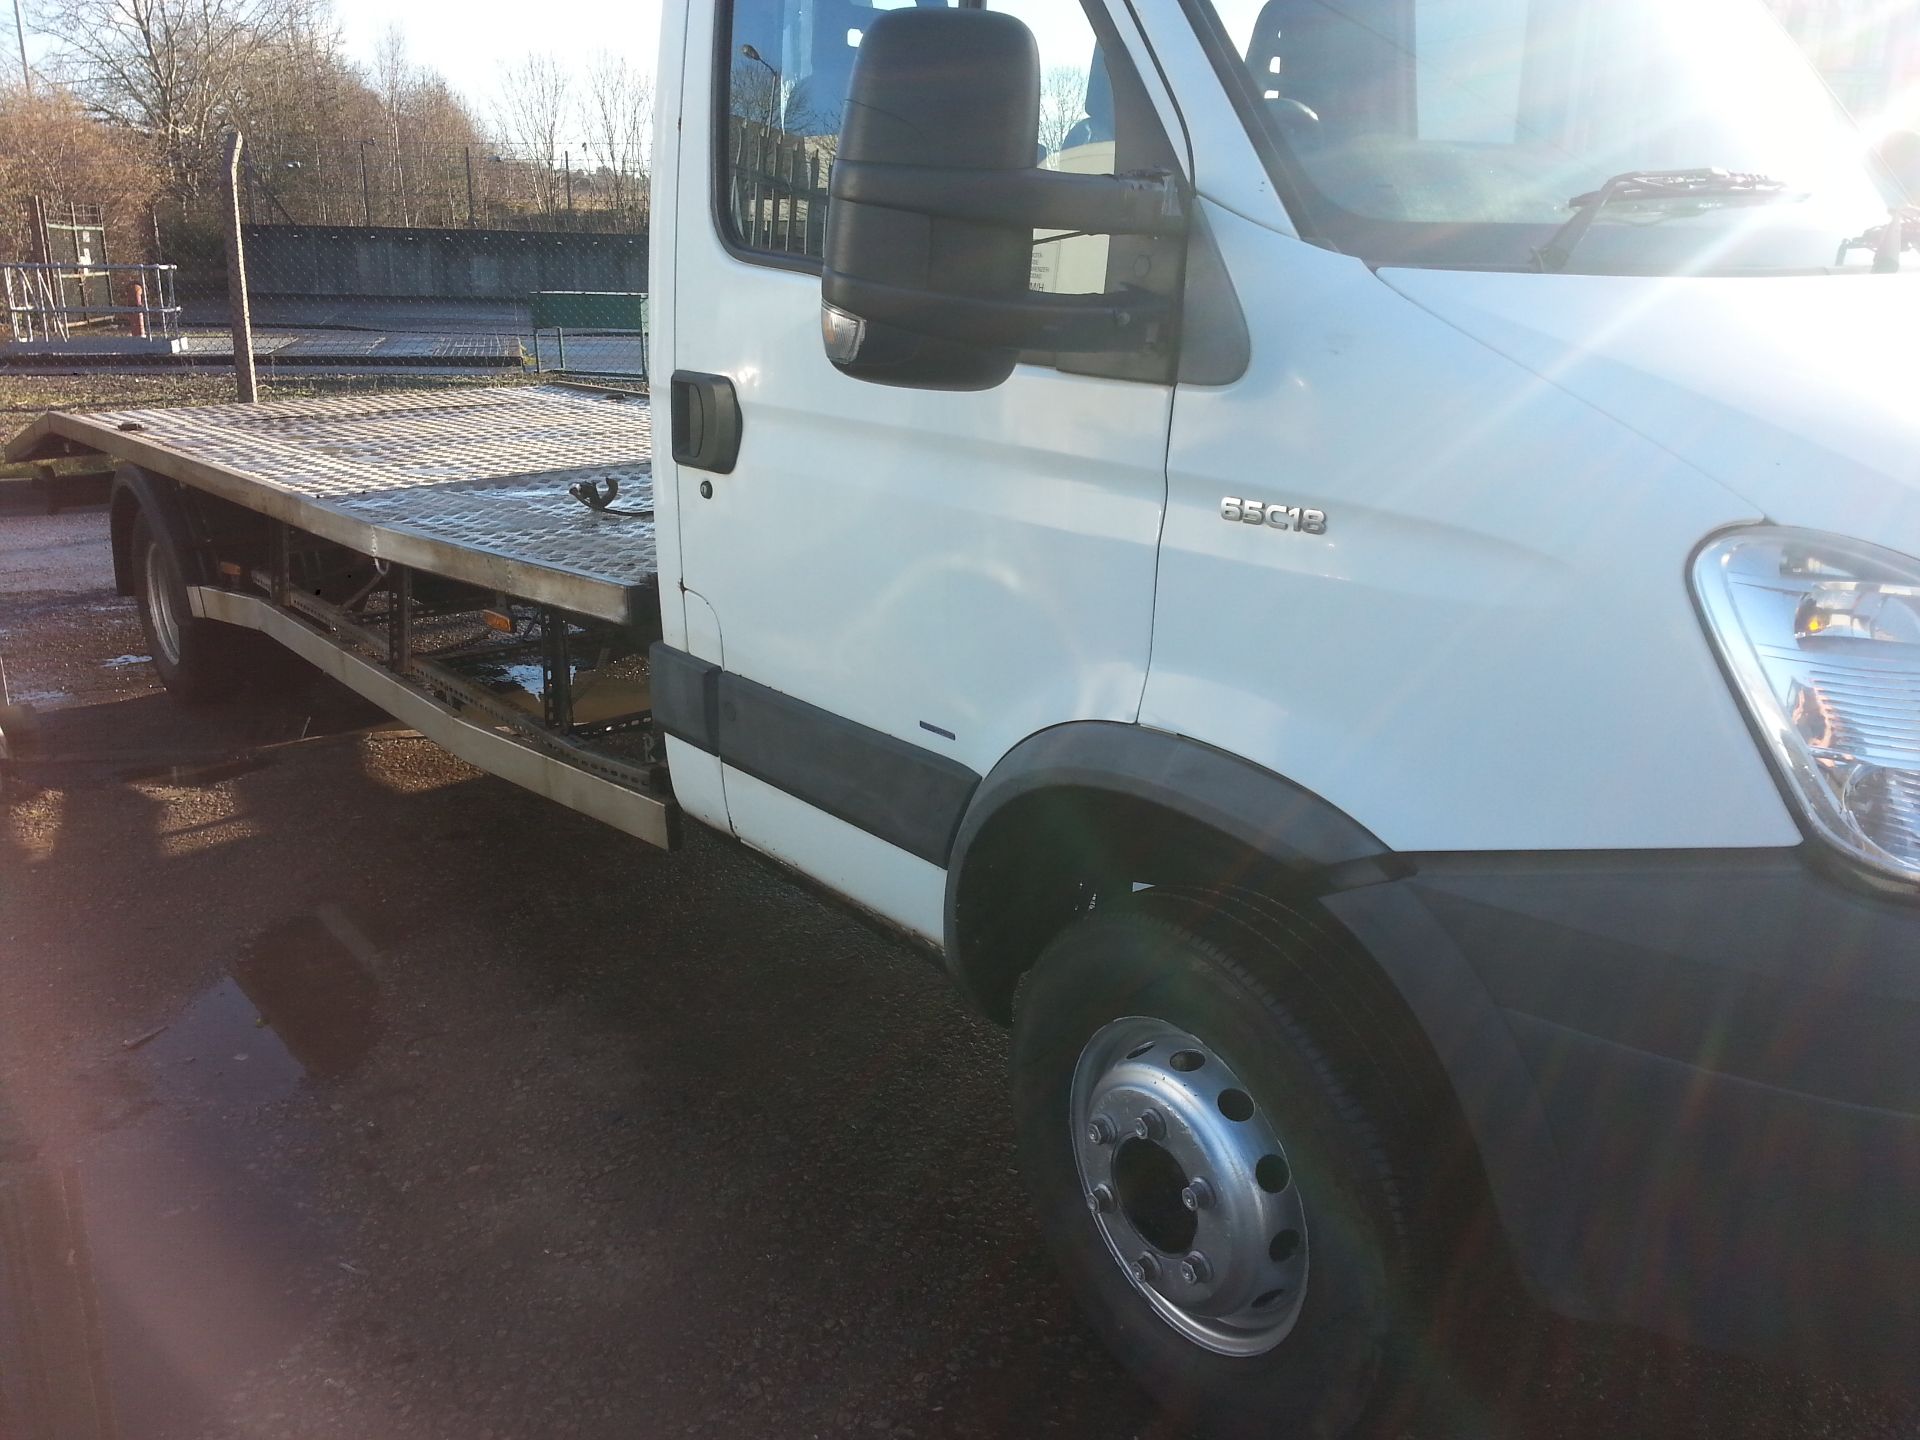 2006/56 IVECO DAILY 65C18 RECOVERY TRUCK, 6.5TON, 3.0 DIESEL ENGINE, 140,459 WARRANTED MILES - Image 7 of 8